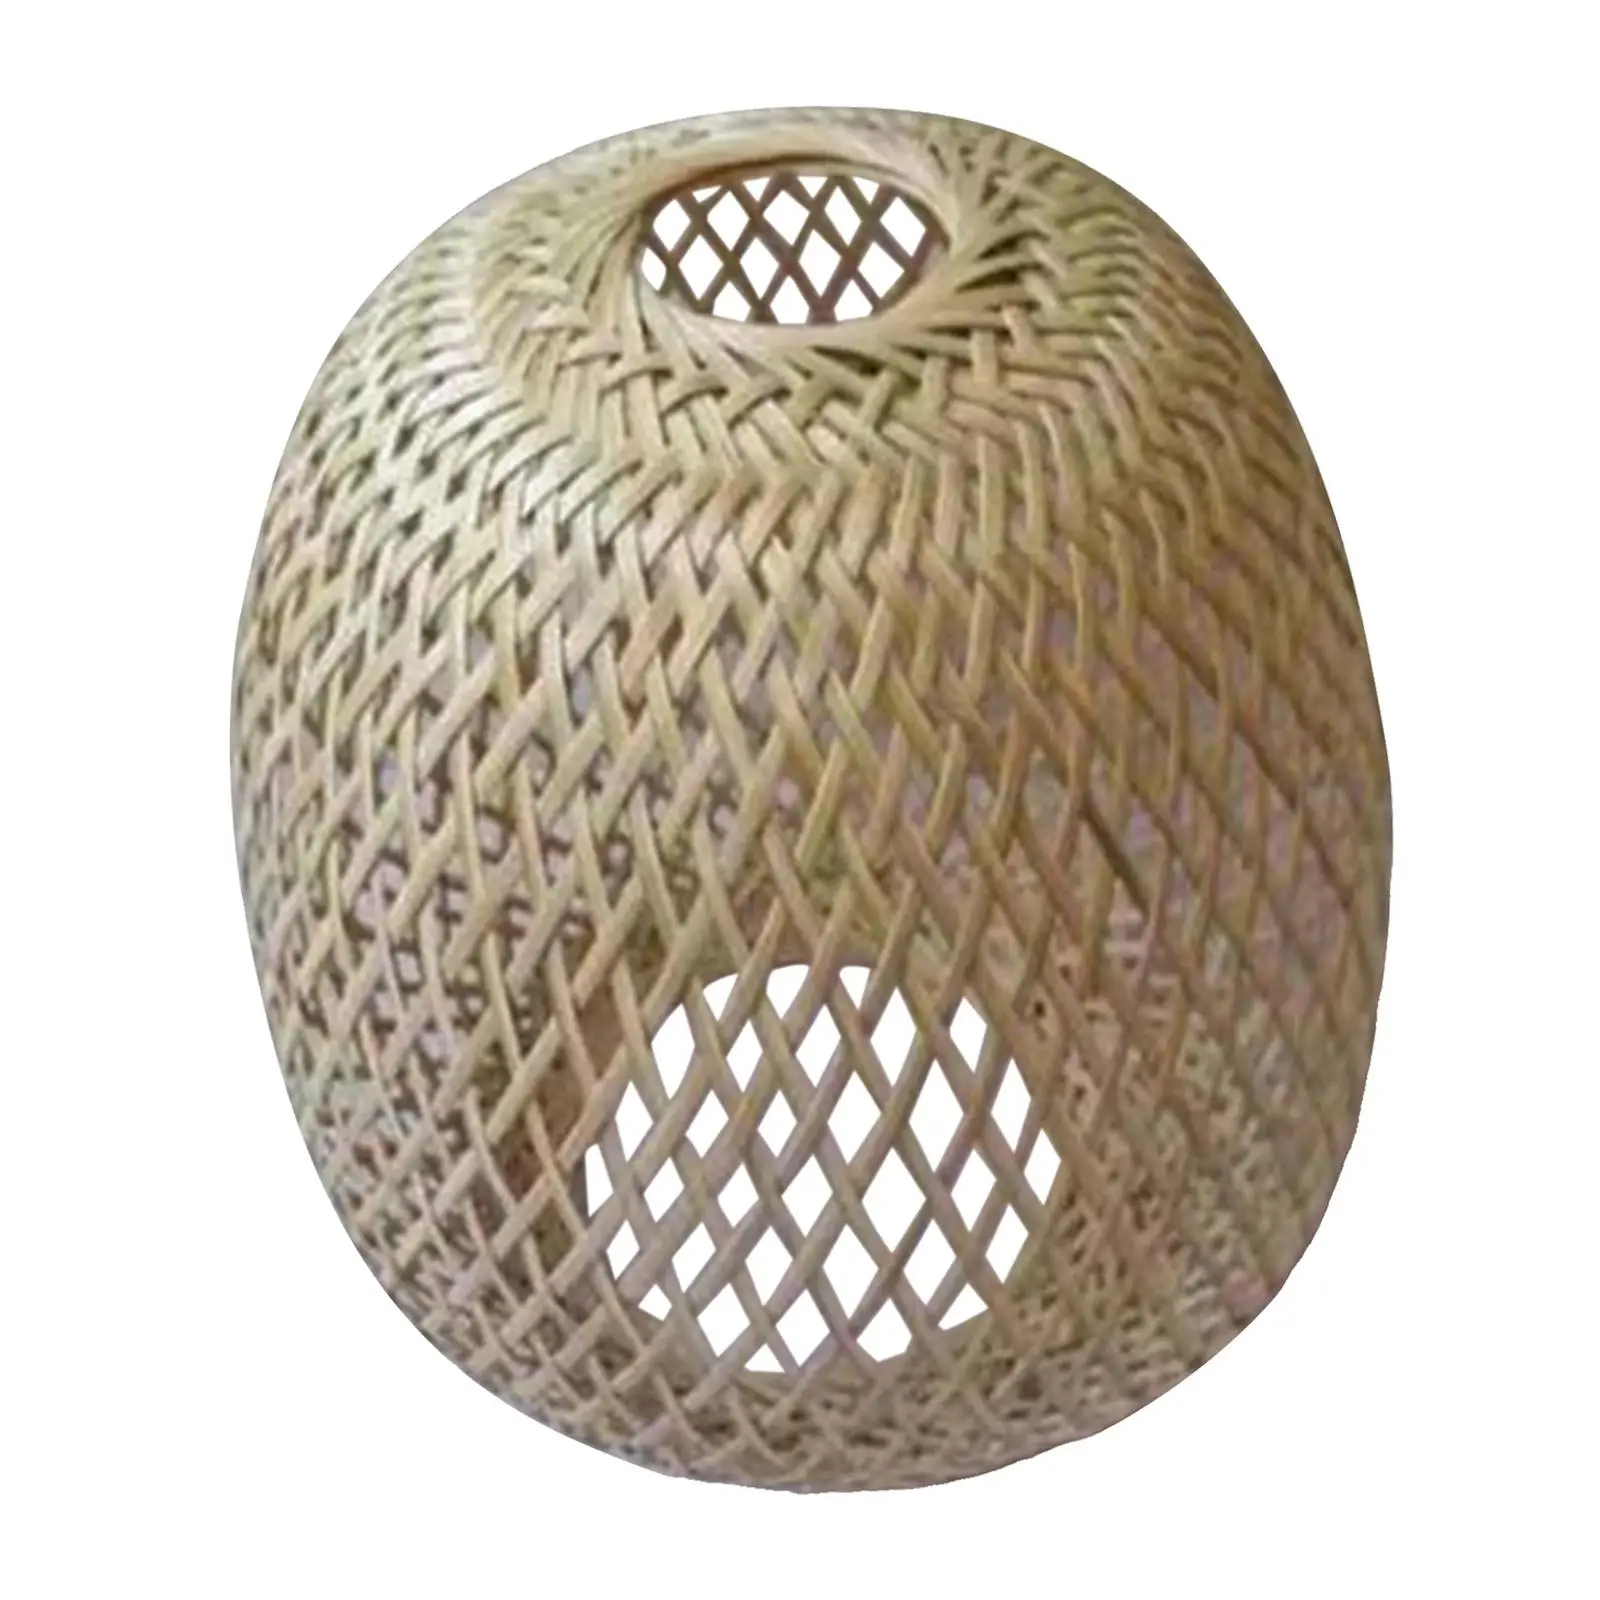 Woven Bamboo Lamp Shade Droplight Ceiling Light Cover Lampshade for Kitchen